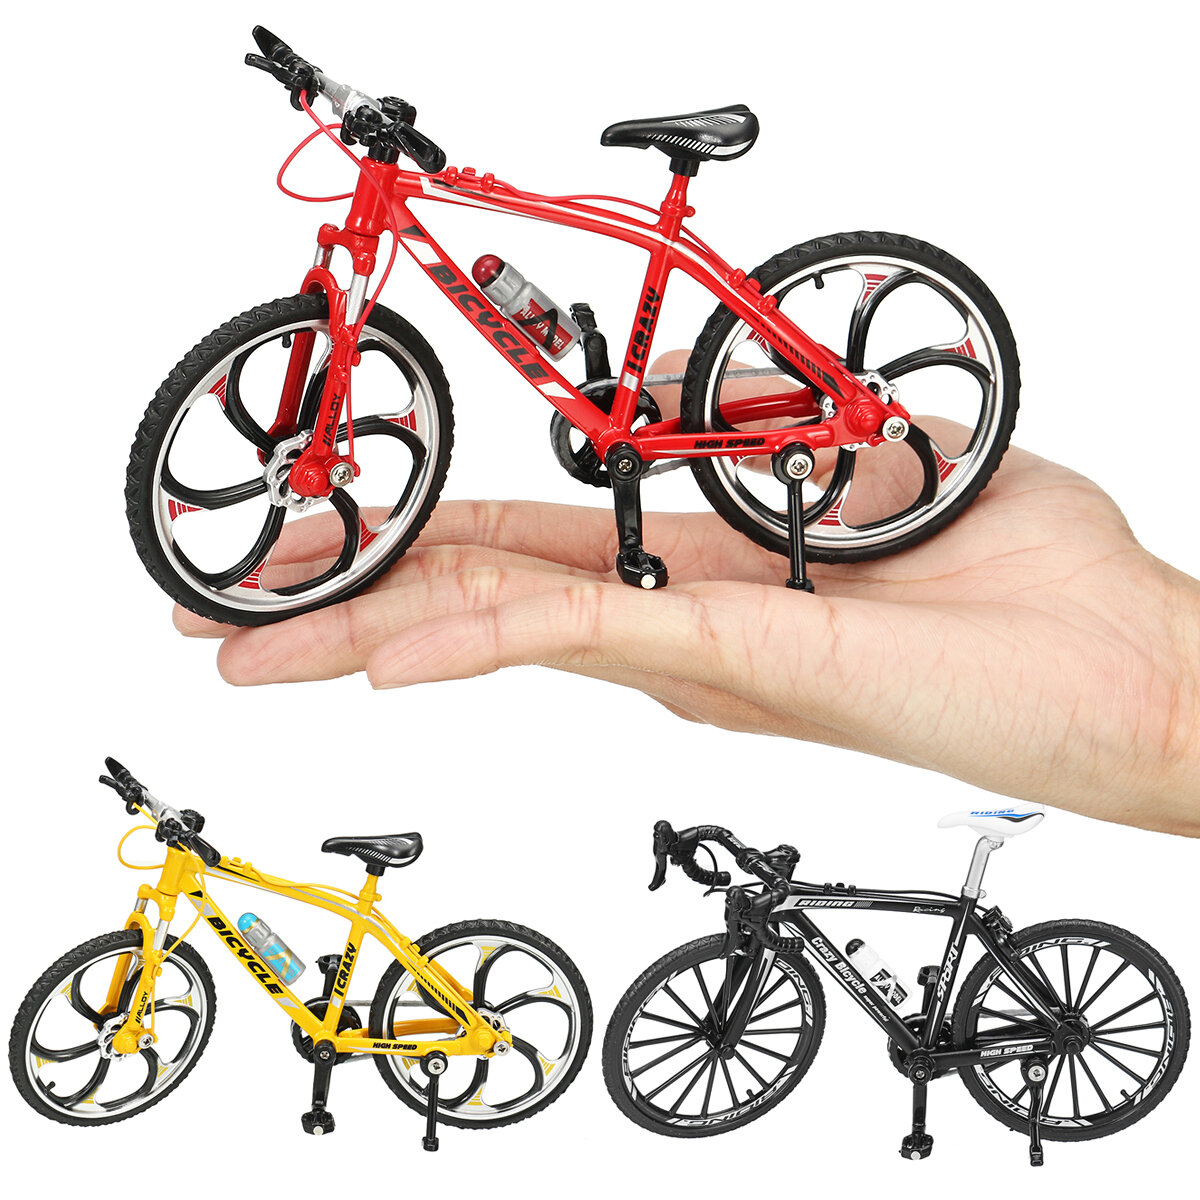 1:10 diecast bicycle model toys racing 